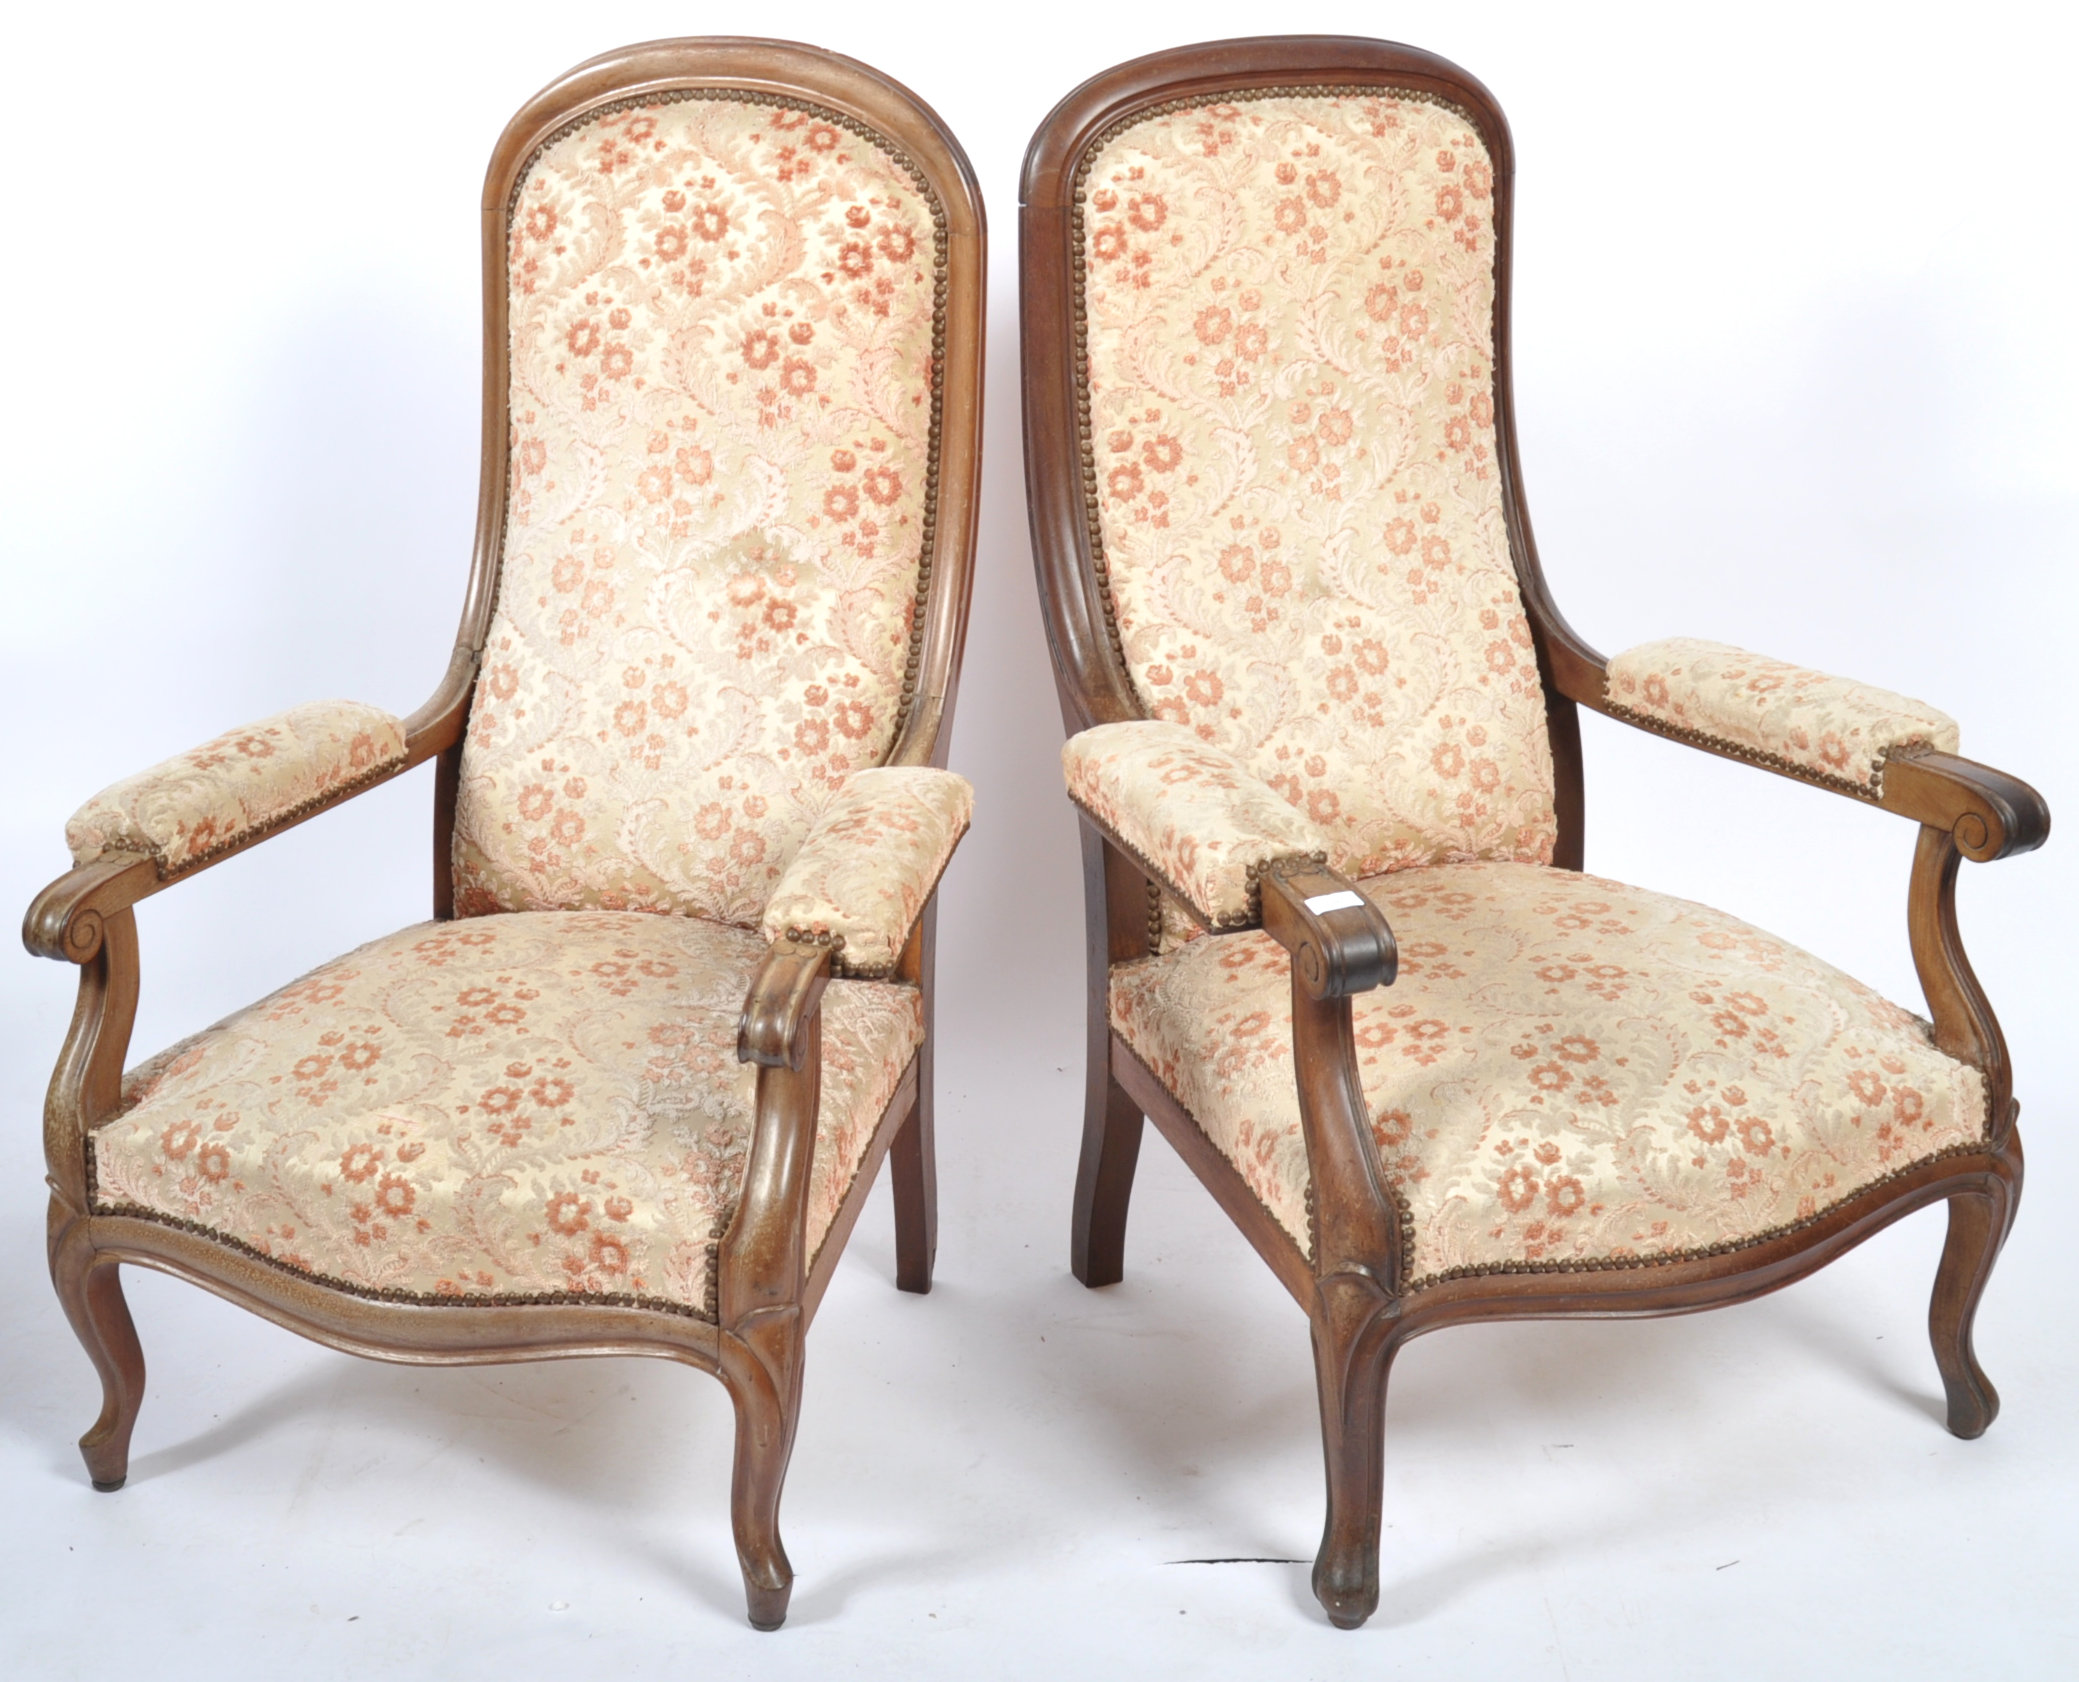 PAIR OF 19TH CENTURY FRENCH HIS AND HERS ARMCHAIRS - Image 2 of 6